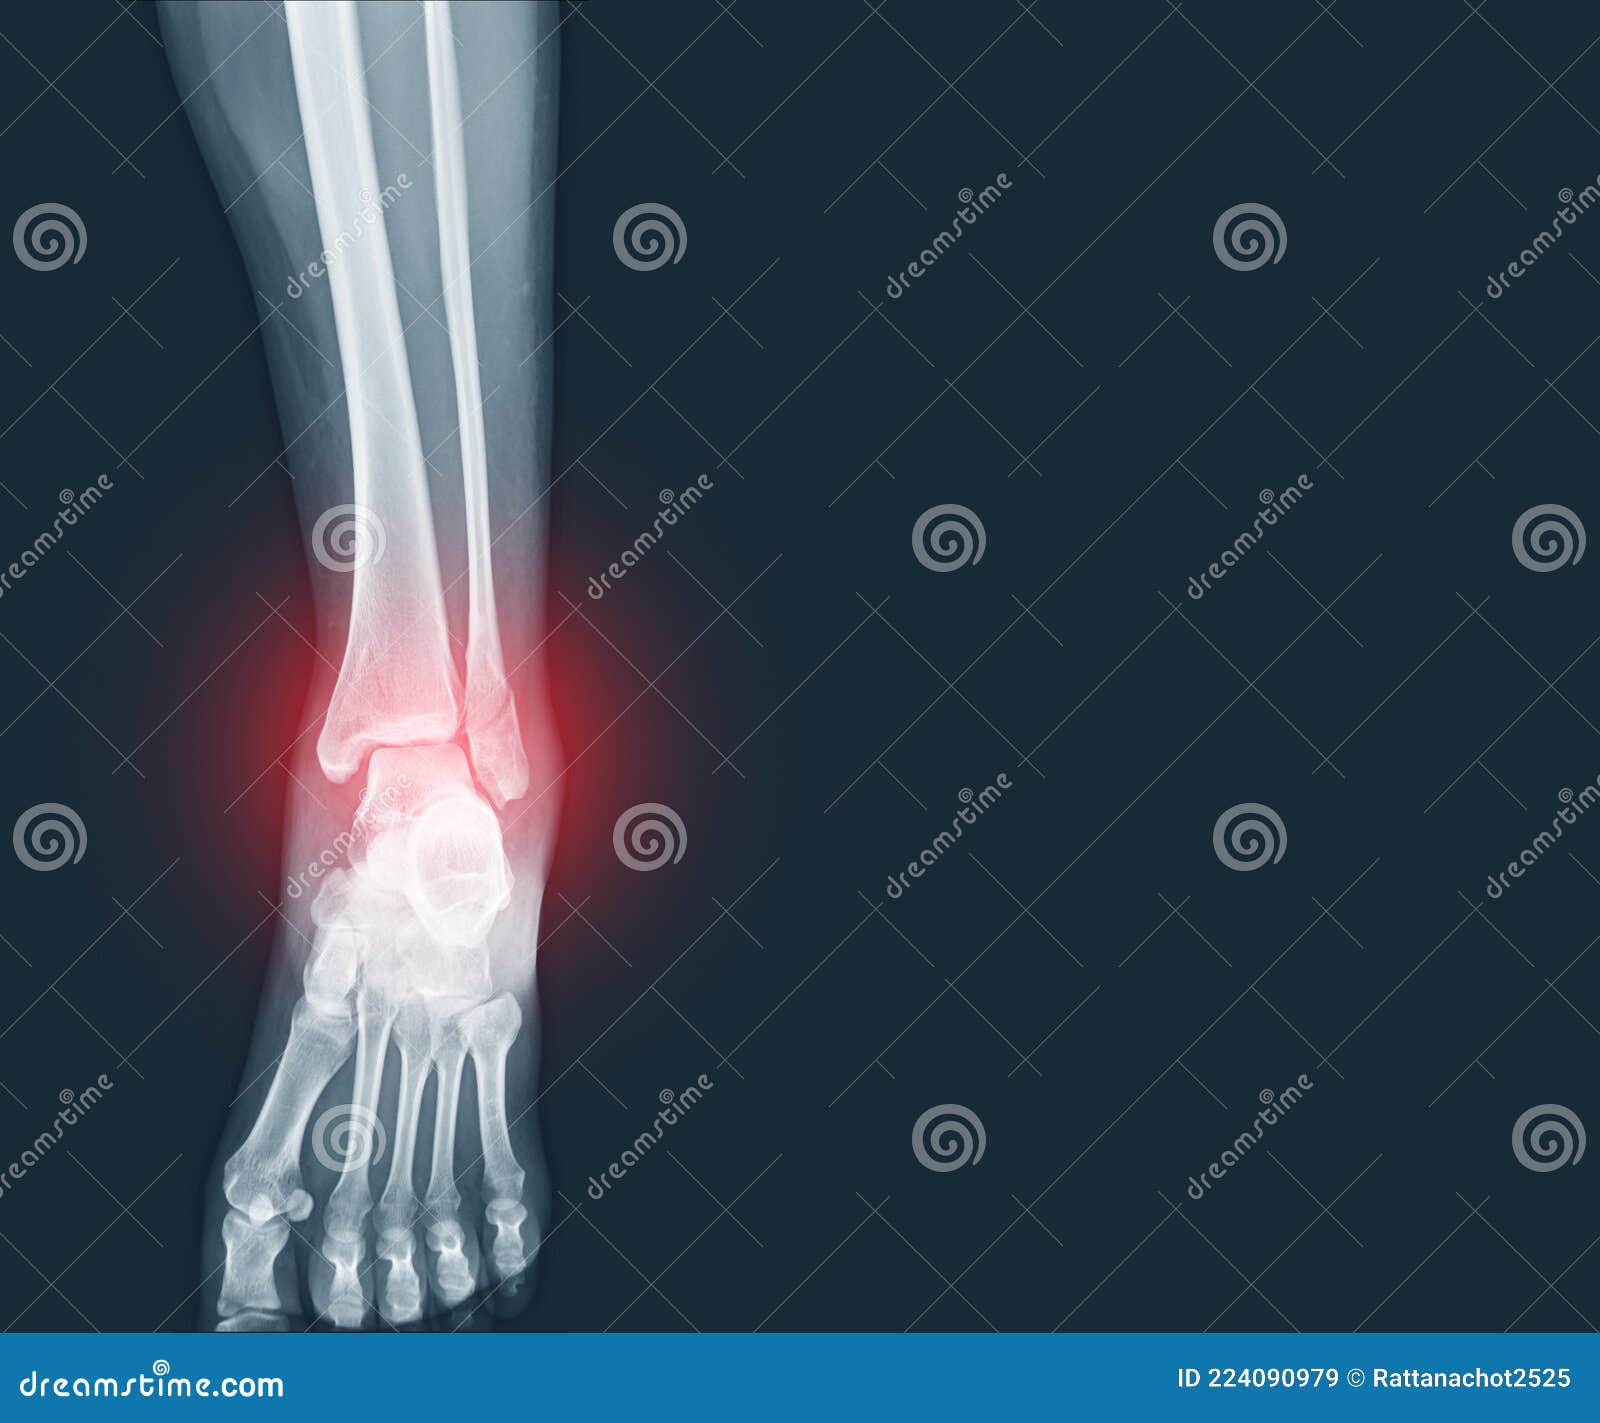 film x-ray ankle and foot fracture distal fibula bone with soft tissues swelling on red mark.medical healthcare concept